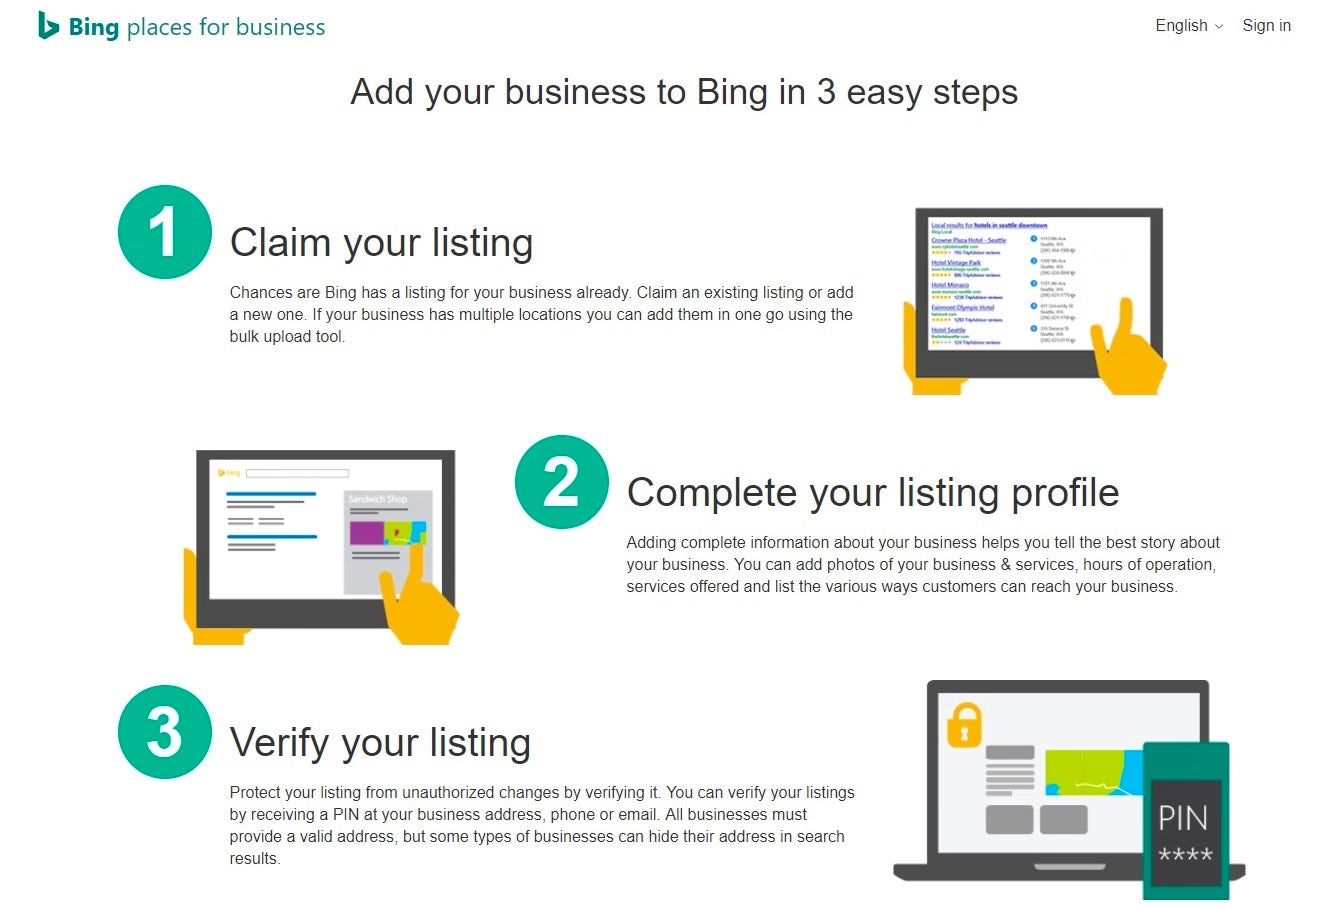 Screenshot of the Bing Places for Business homepage explaining how to add your business to Bing.